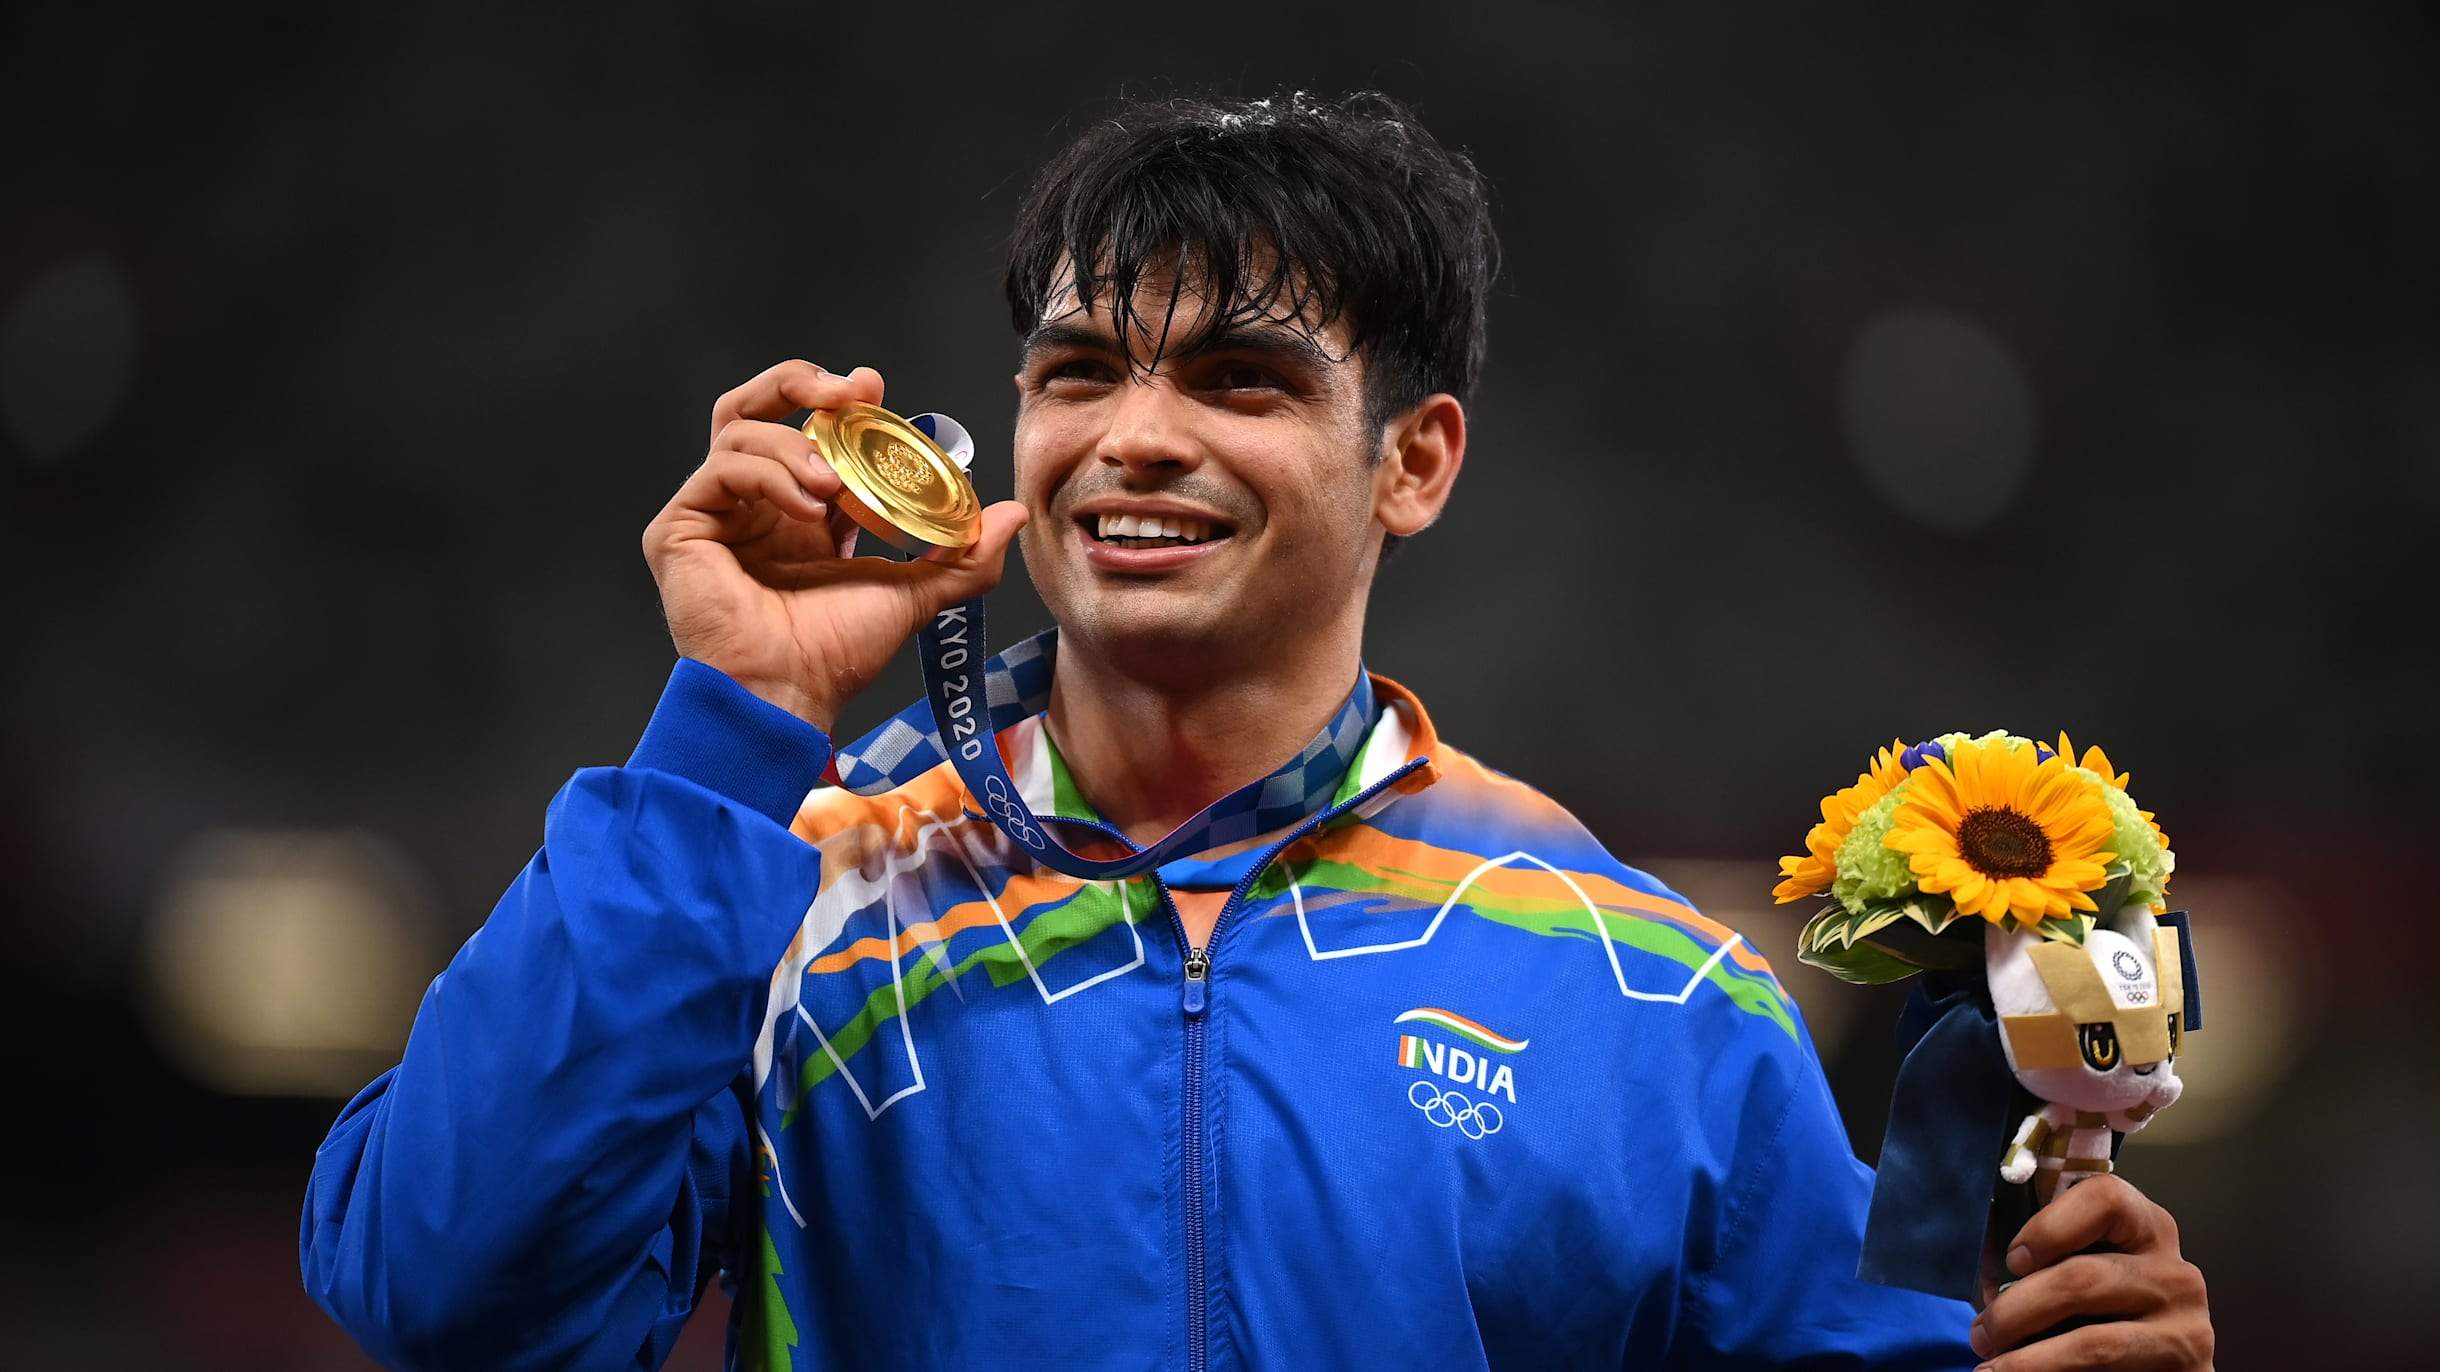 Neeraj Chopra wins Gold at World Athletics Championships with Remarkable 88.17-Meter Javelin Throw in Final